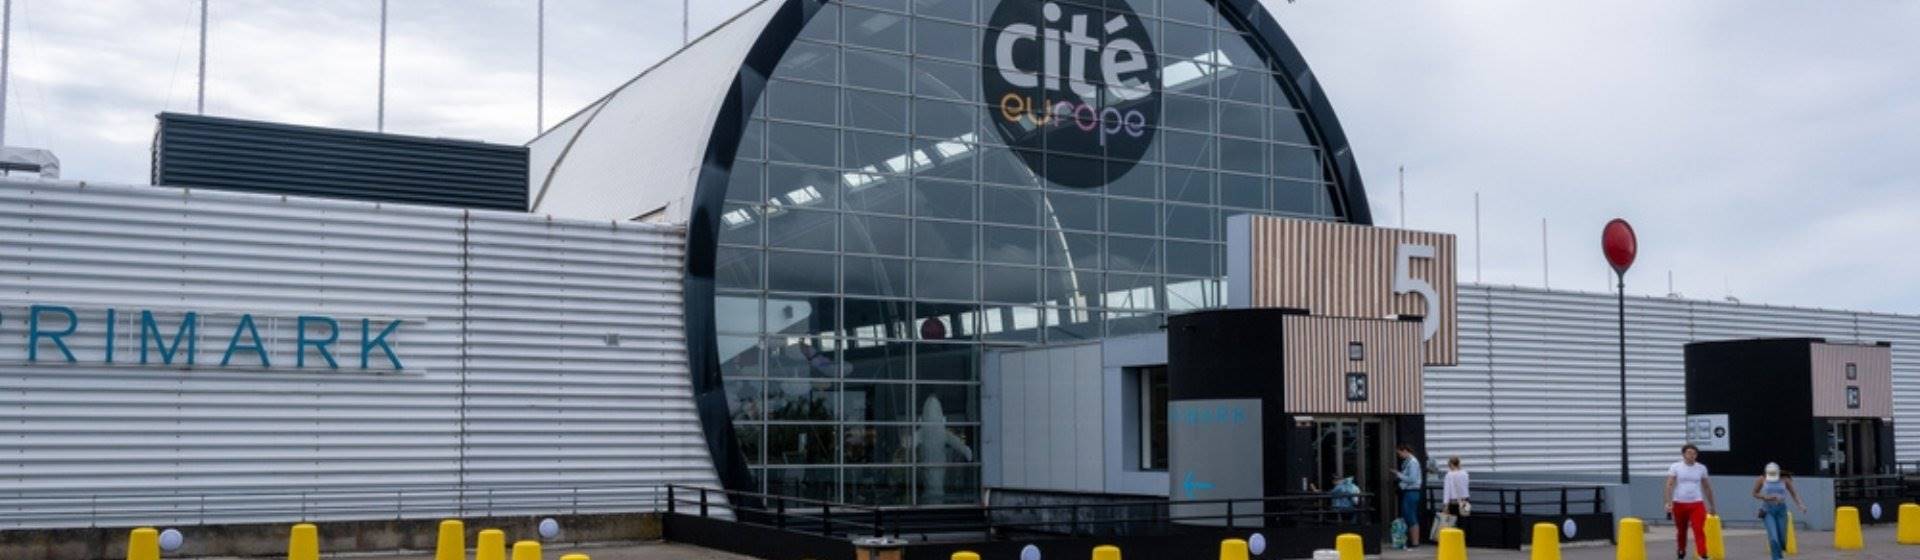 Entrance of Cité Europe shopping mall